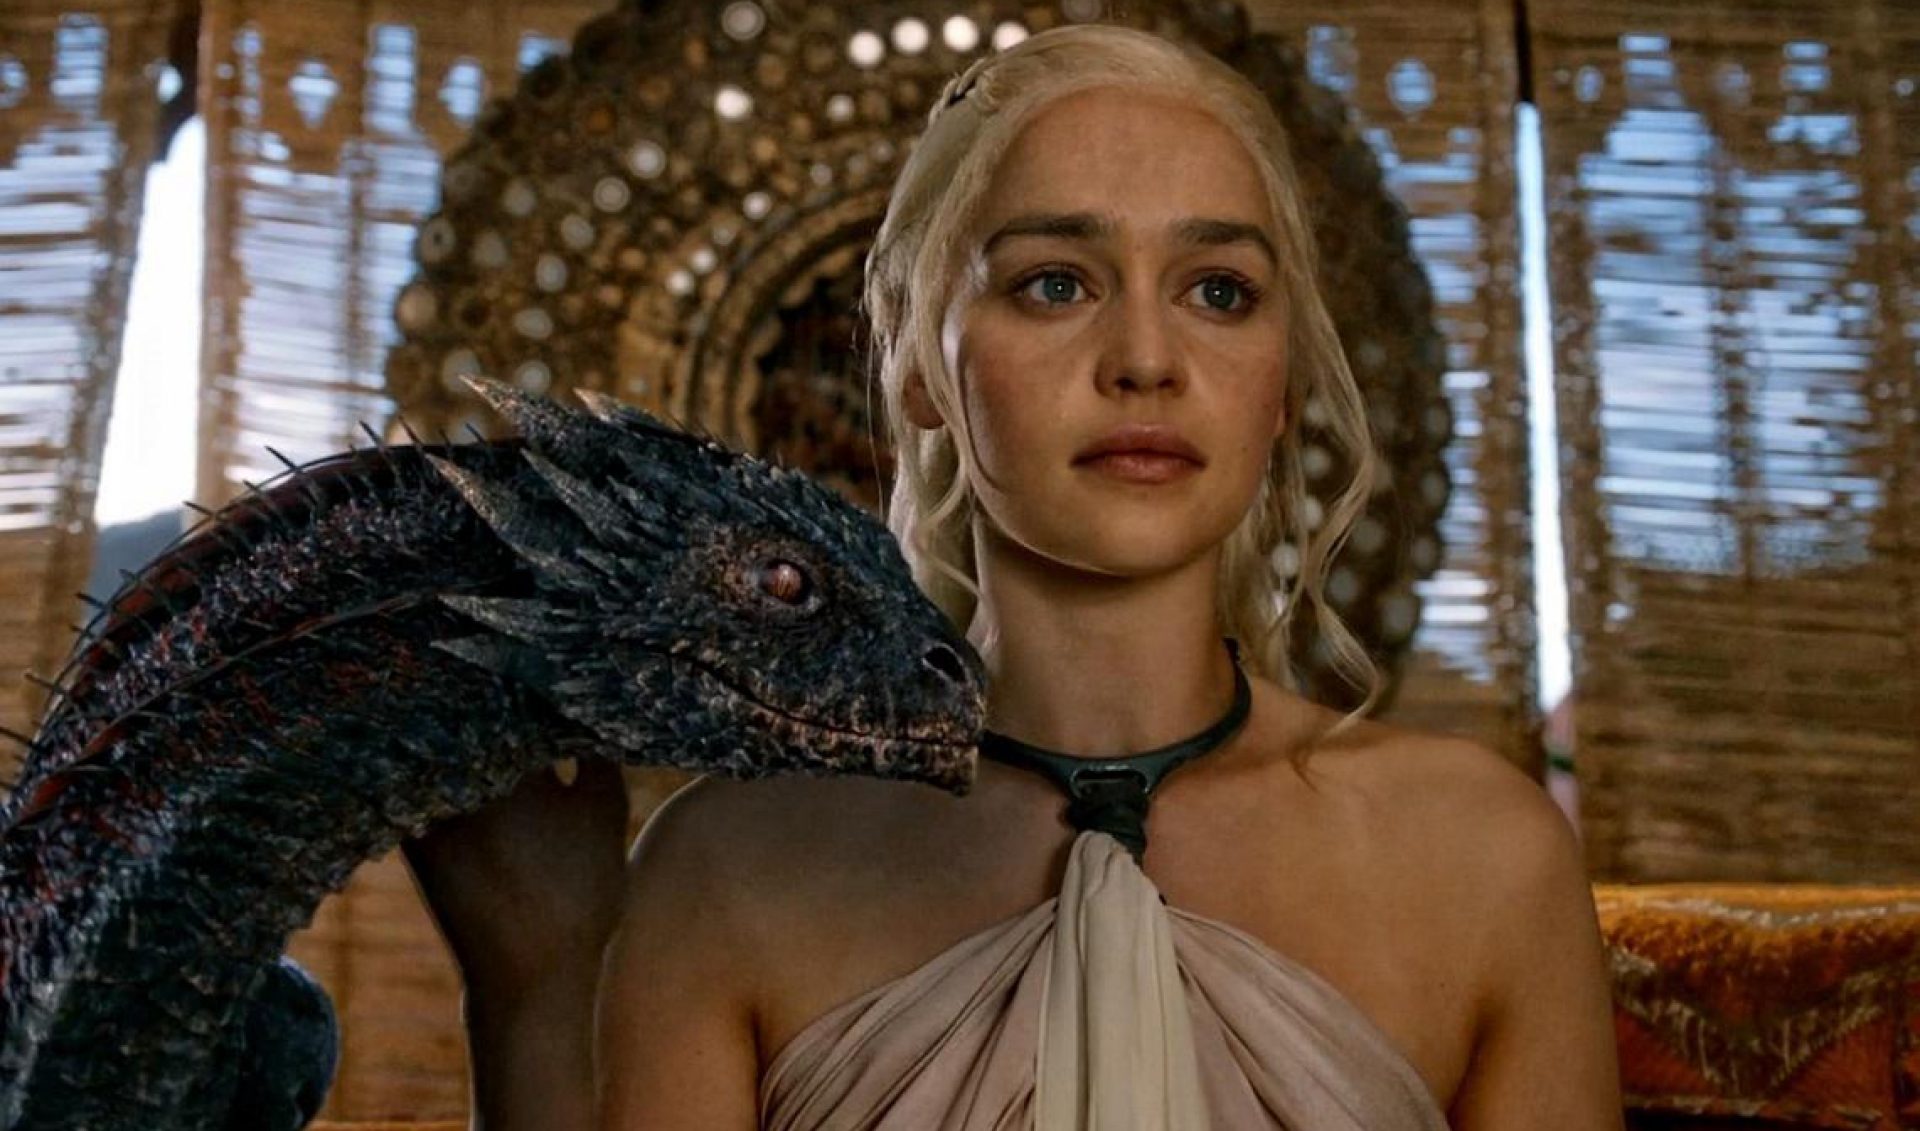 ‘Game Of Thrones’ Continues To Be Most-Pirated TV Show Of The Last Several Years